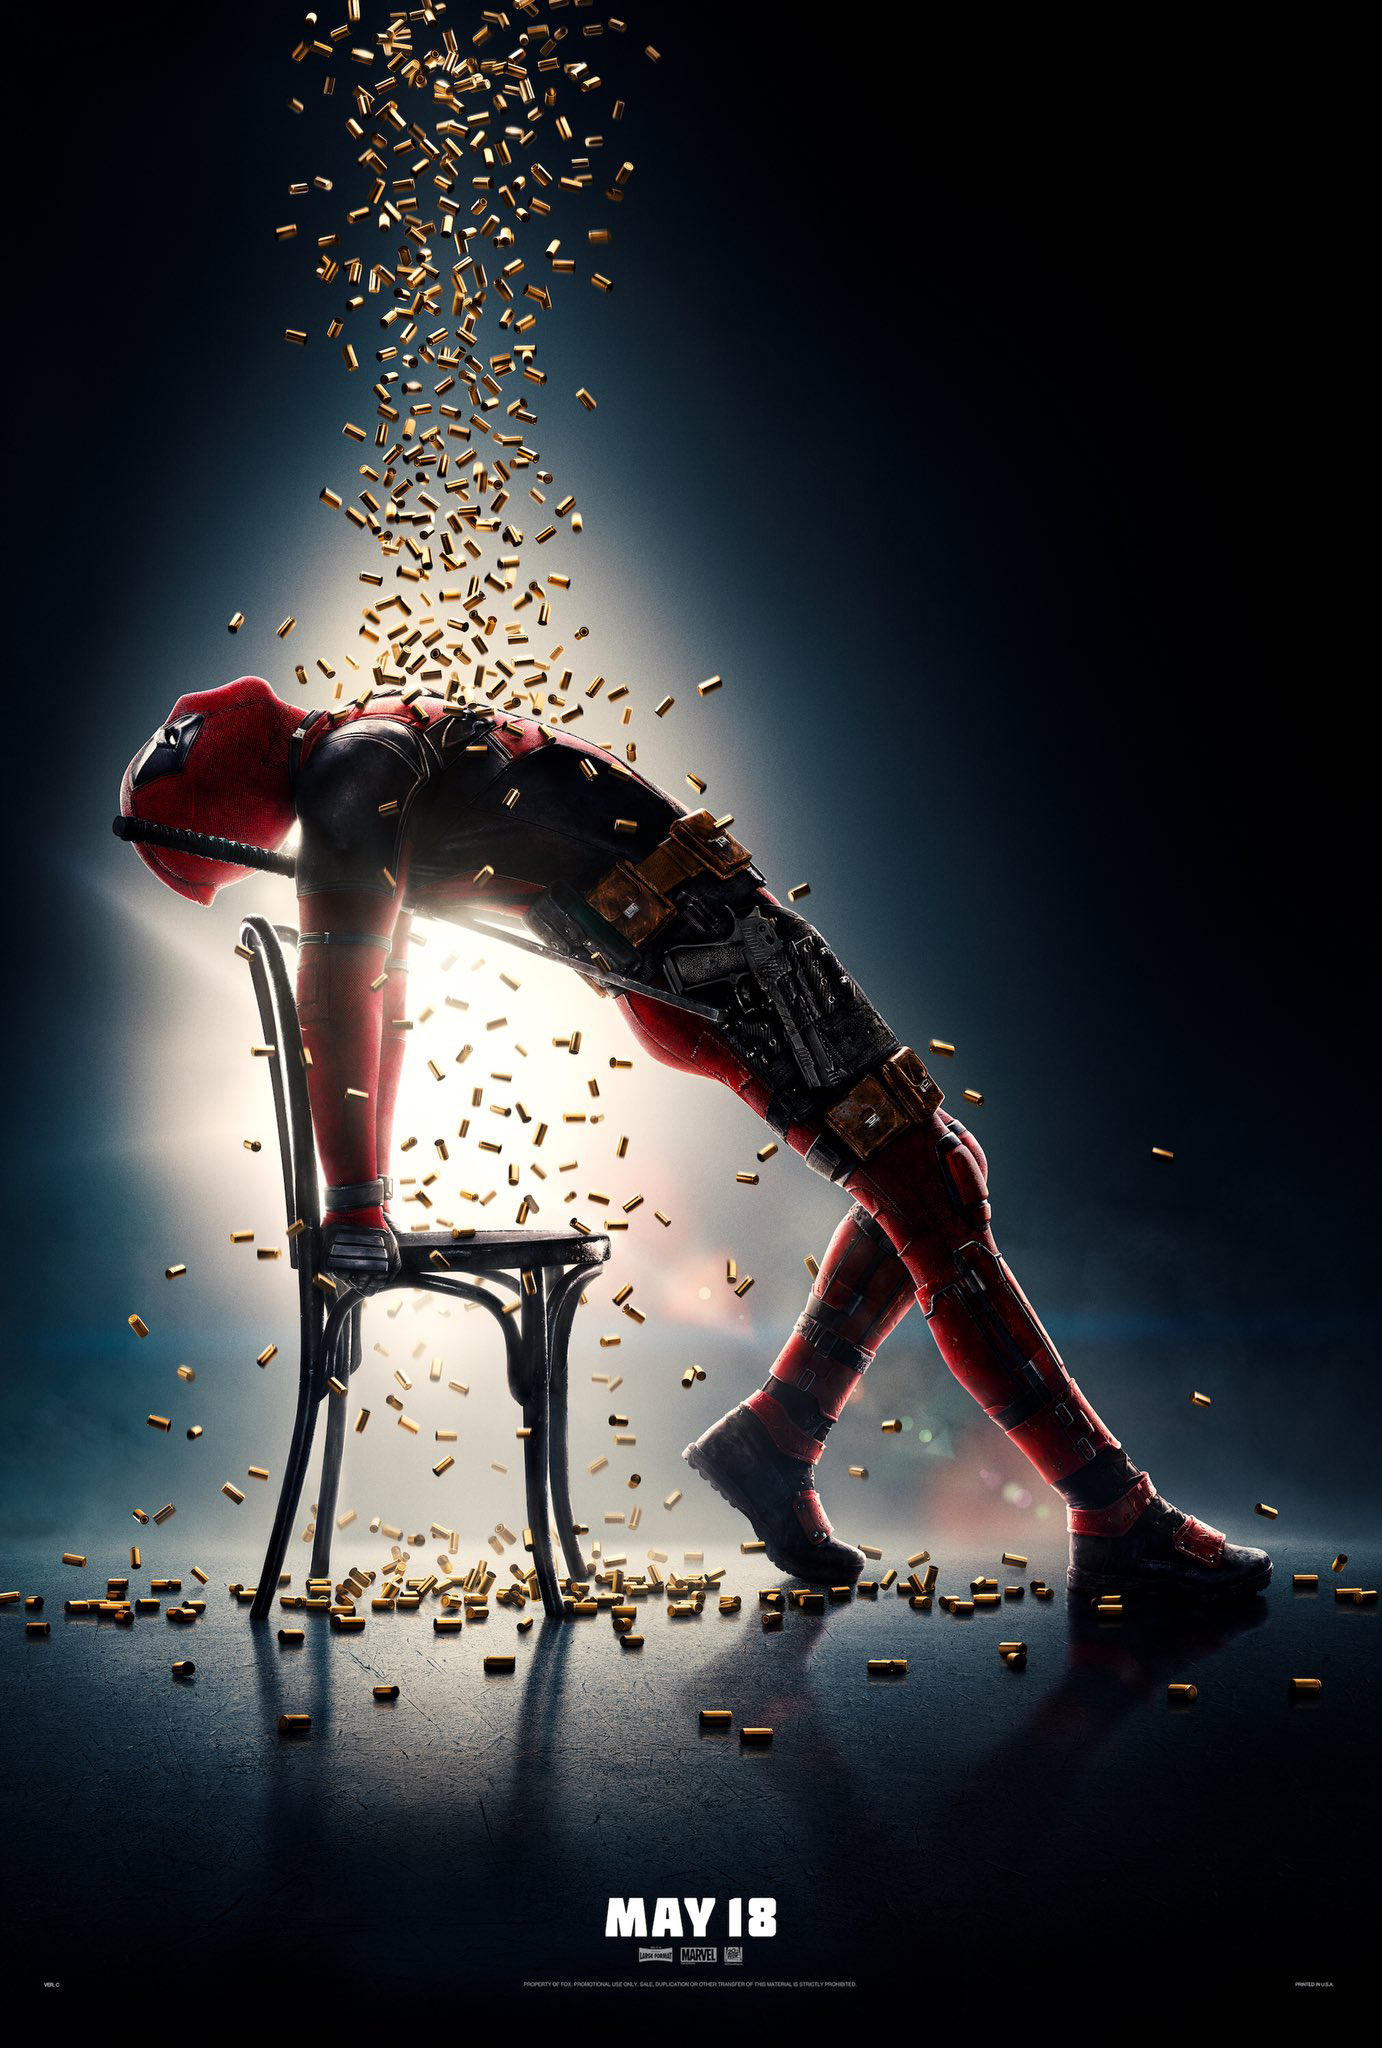 Deadpool 2 film review: does the sequel live up to its predecessor?